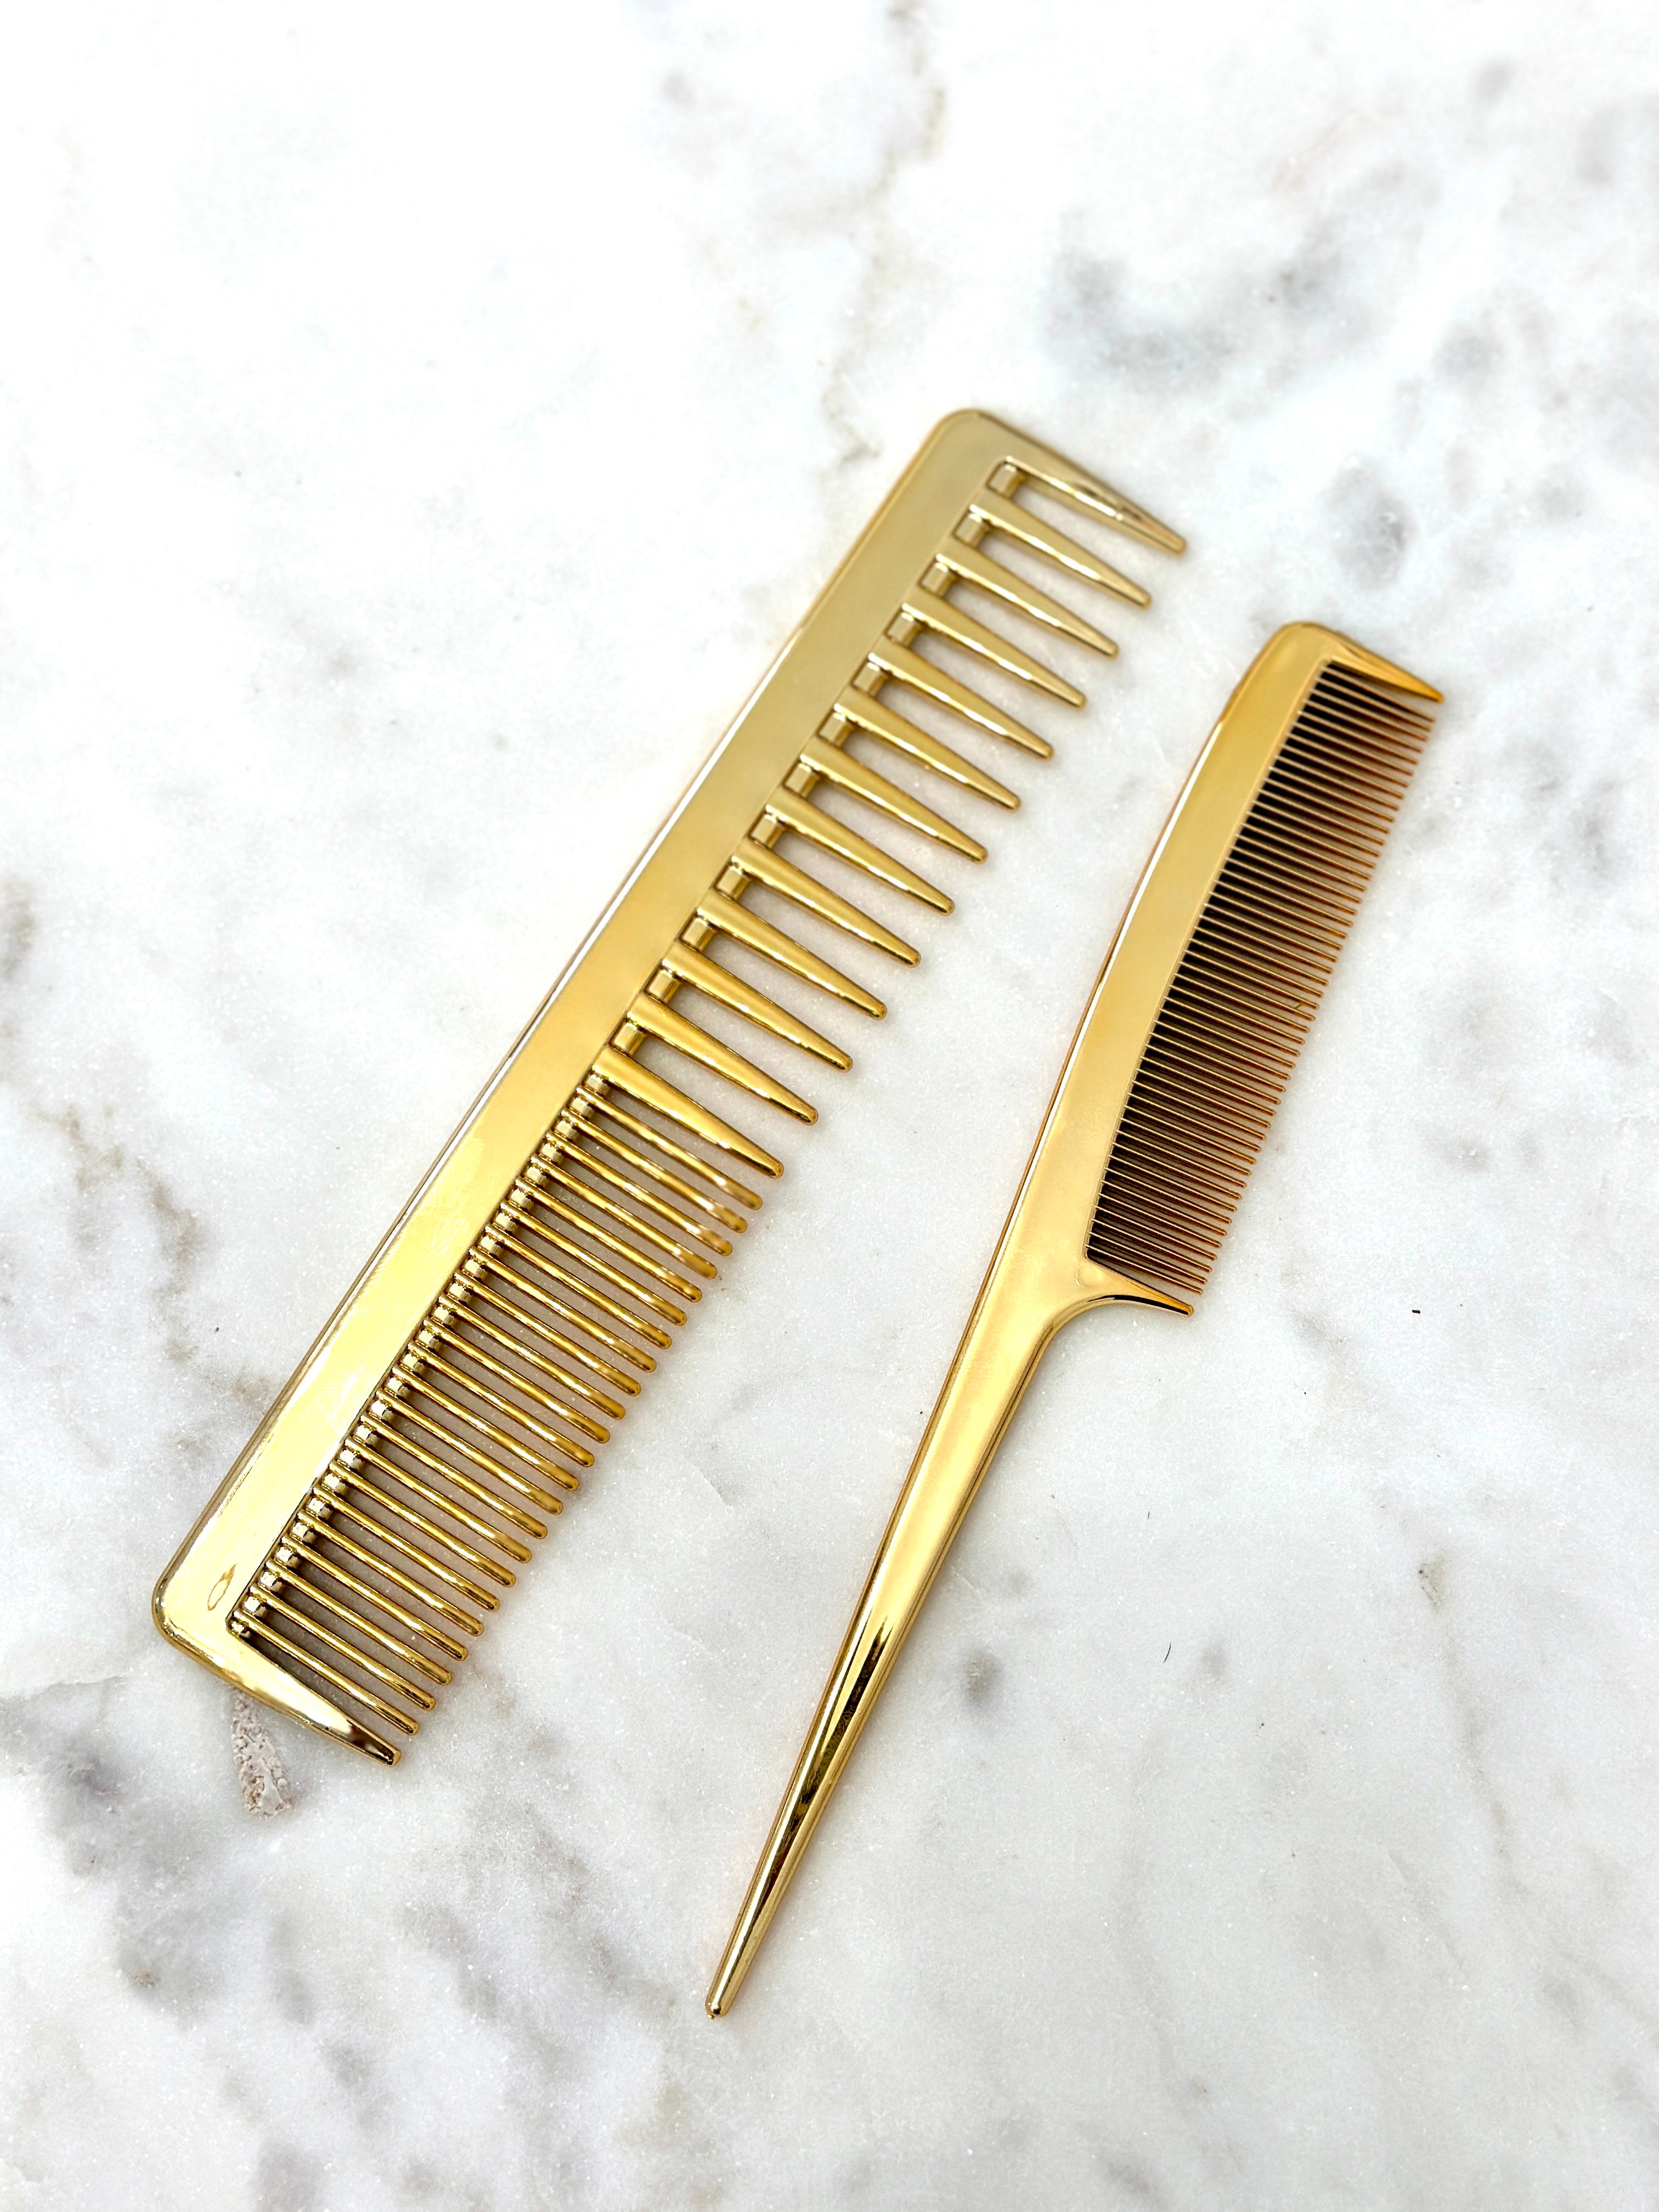 Gold Styling Combs - S.Adams Collection